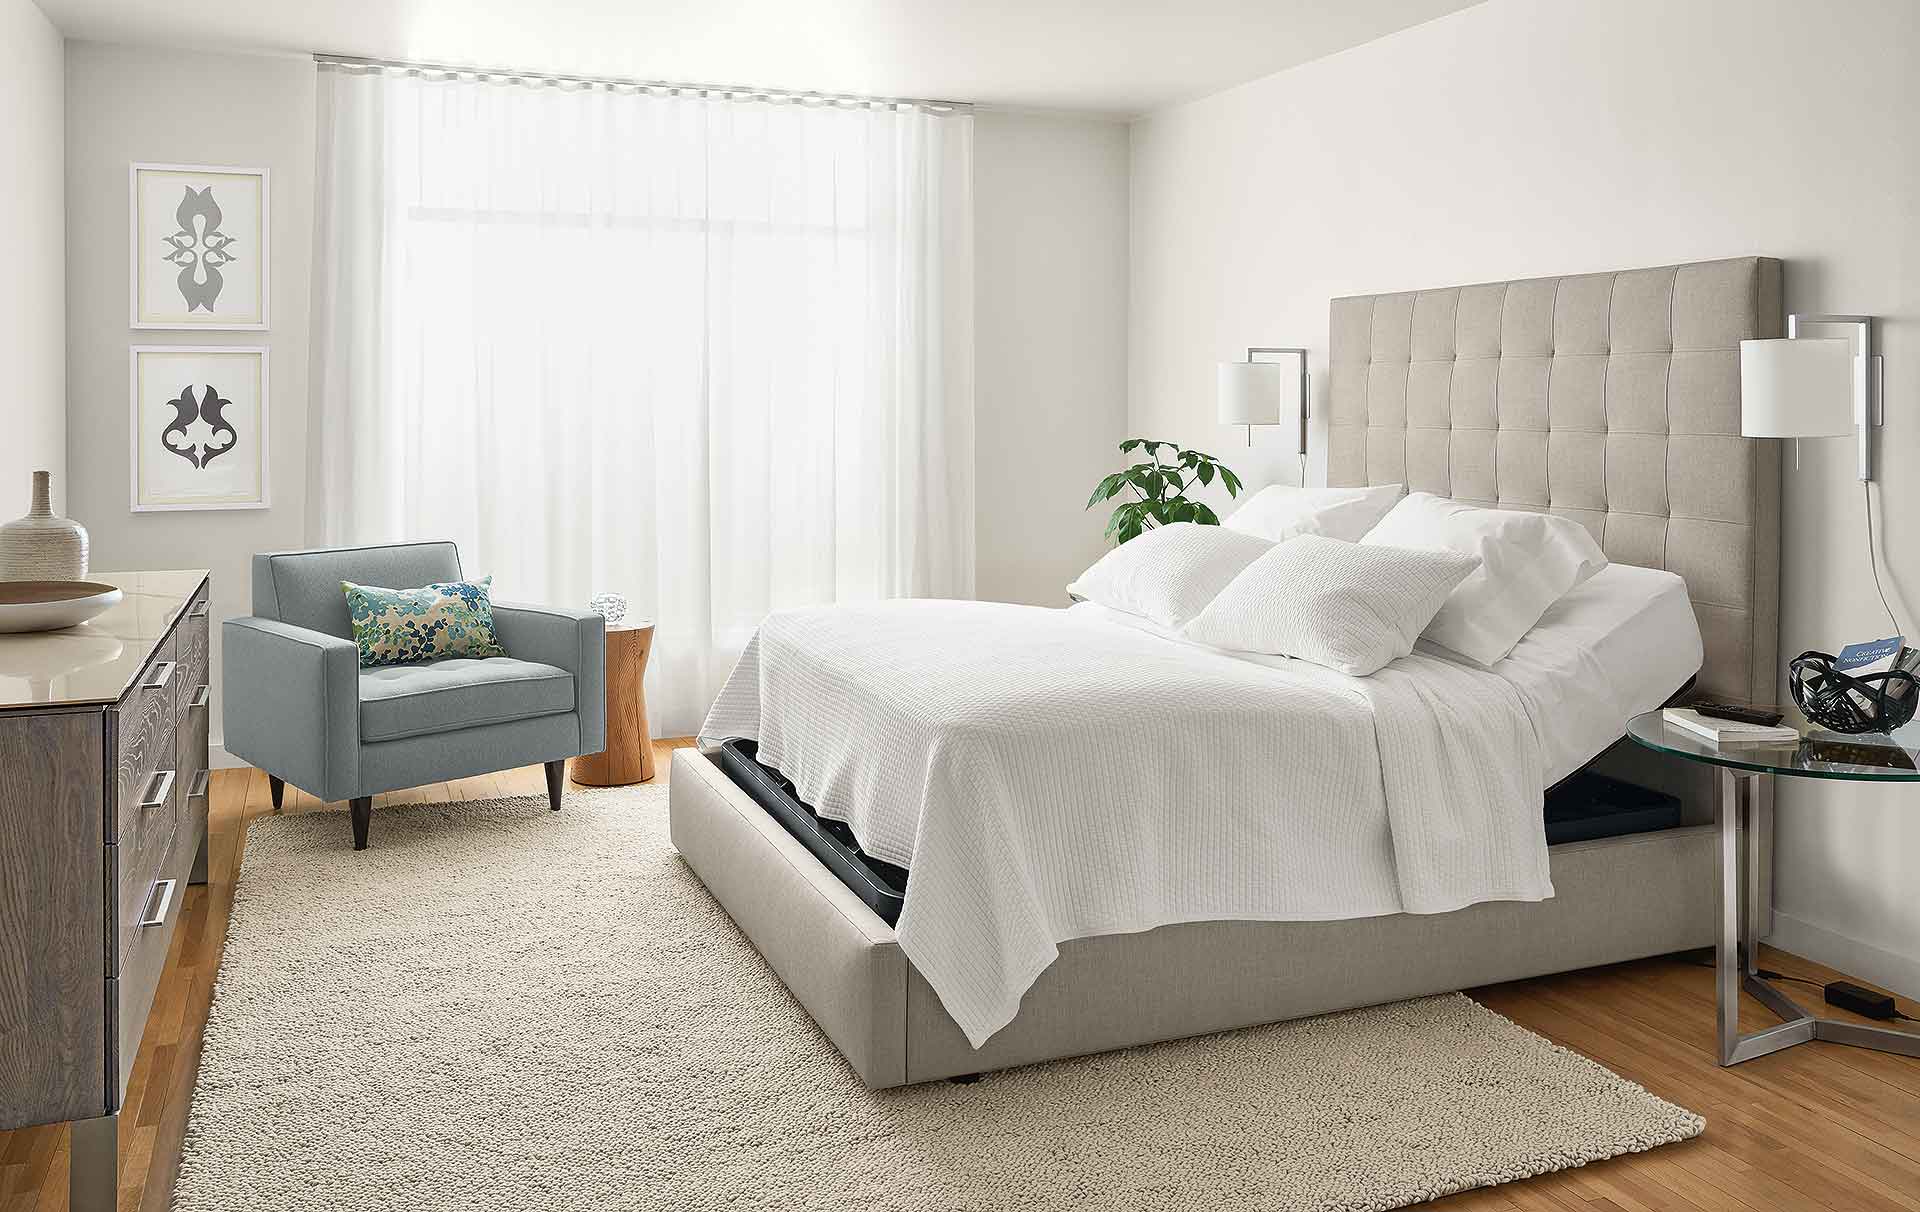 How to Decorate an Adjustable Bed